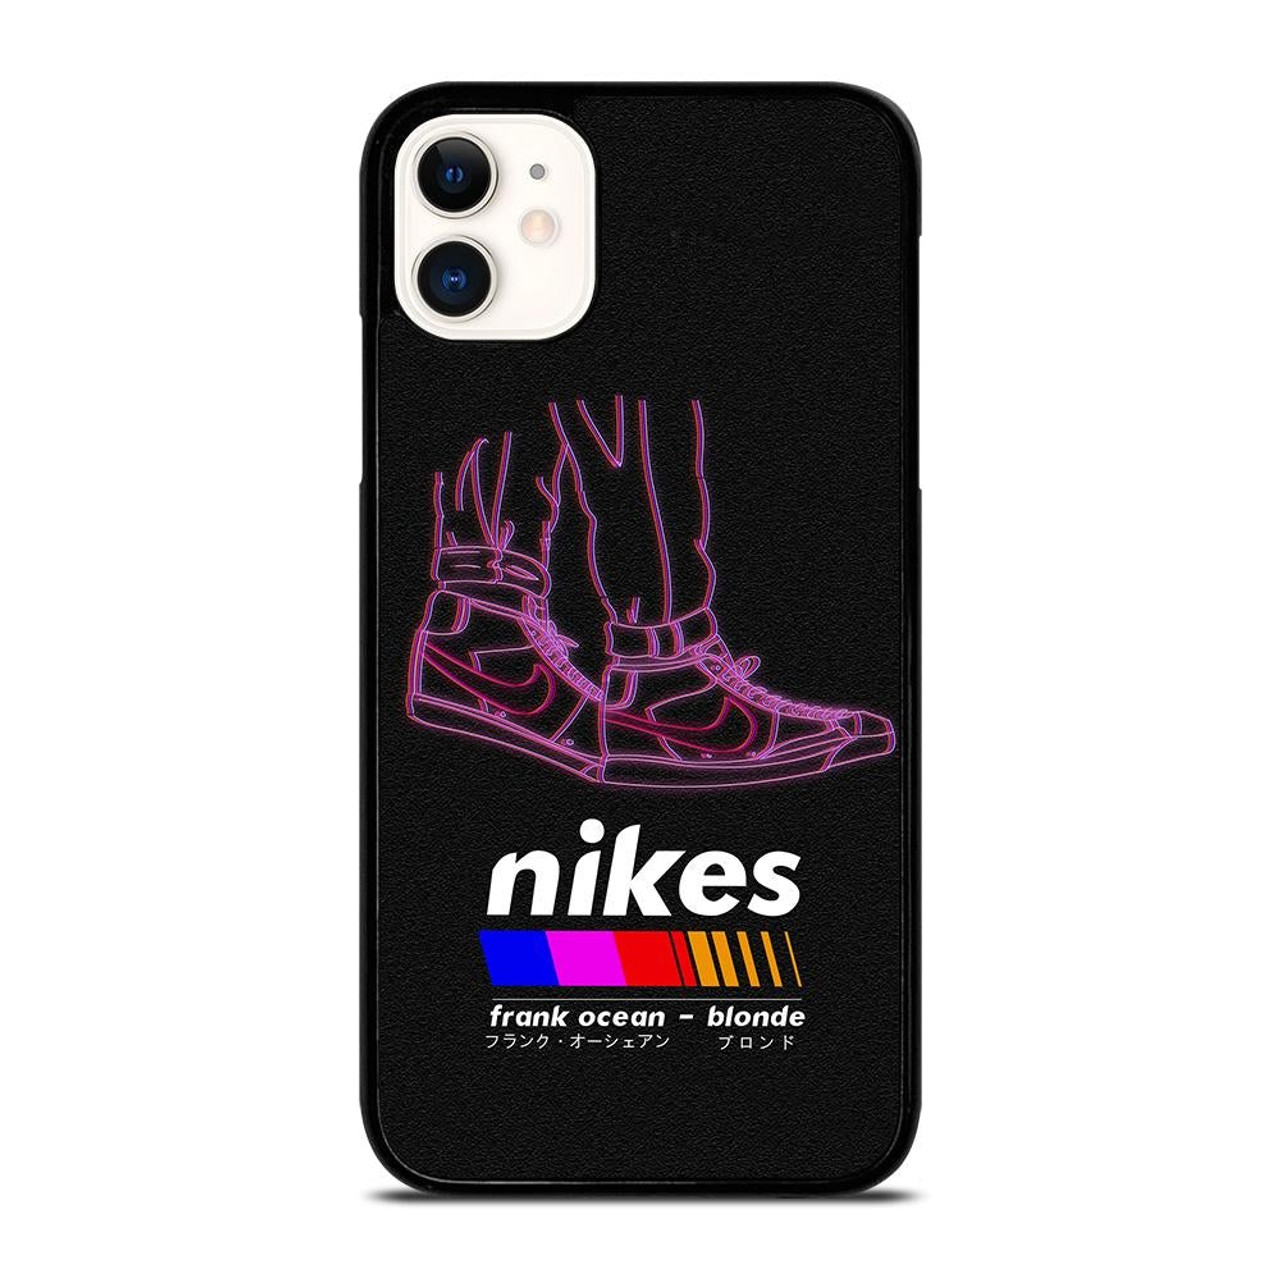 FRANK OCEAN BLOND NIKES iPhone 11 Cover